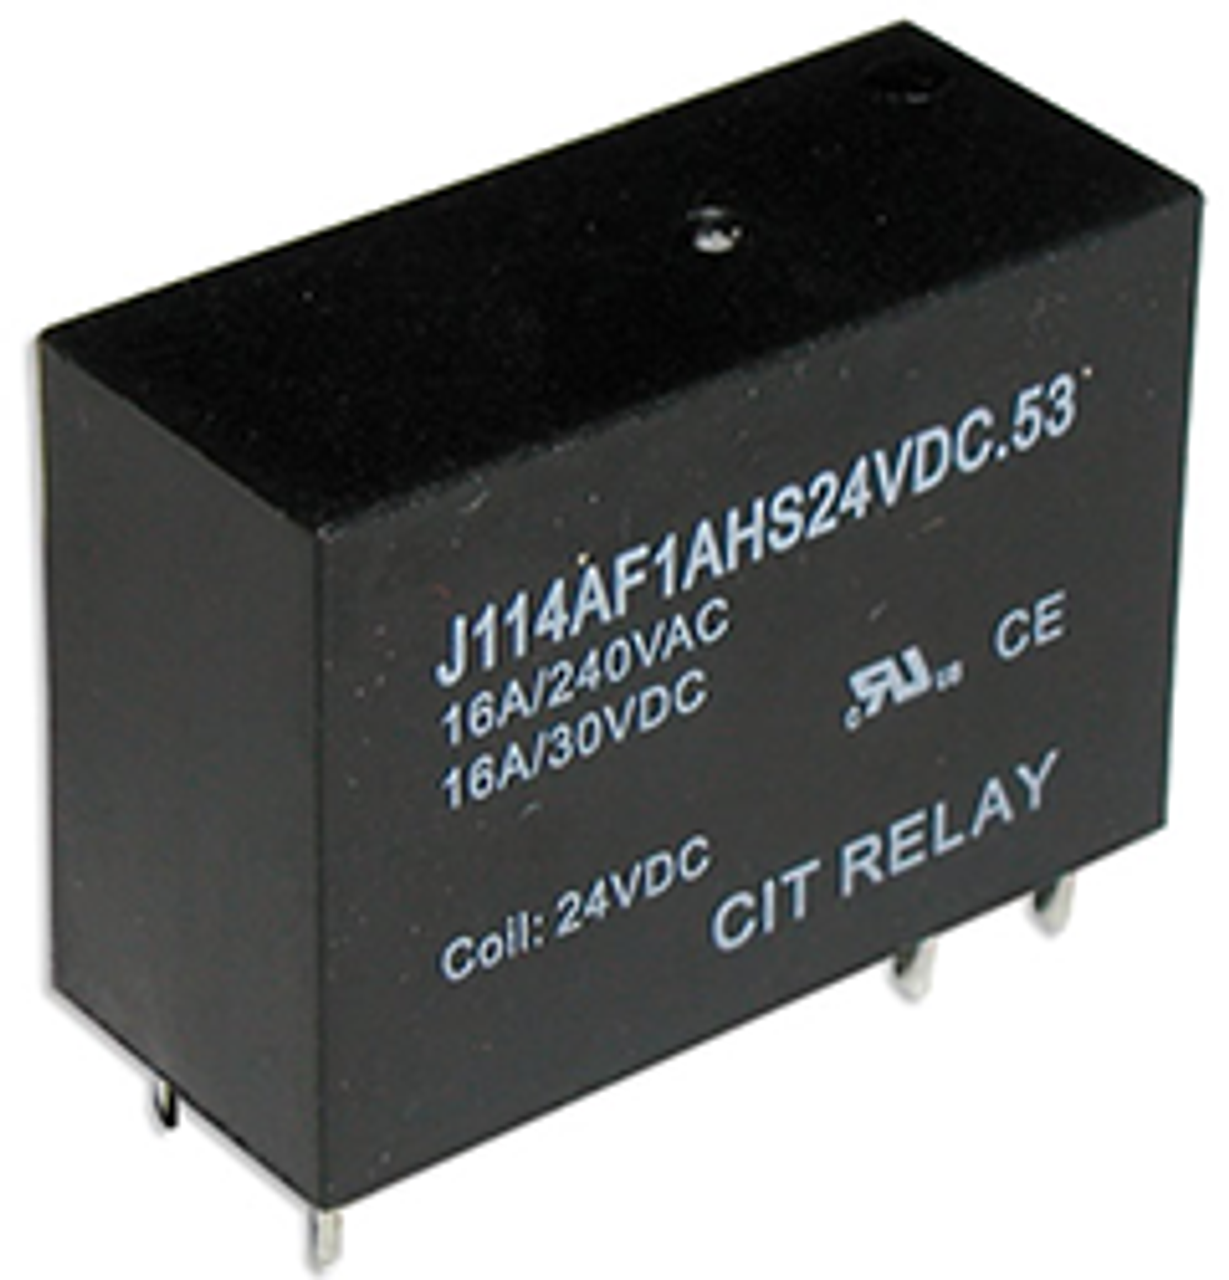 CIT Relay and Switch J114AF1CS9VDC.72 Power Relays